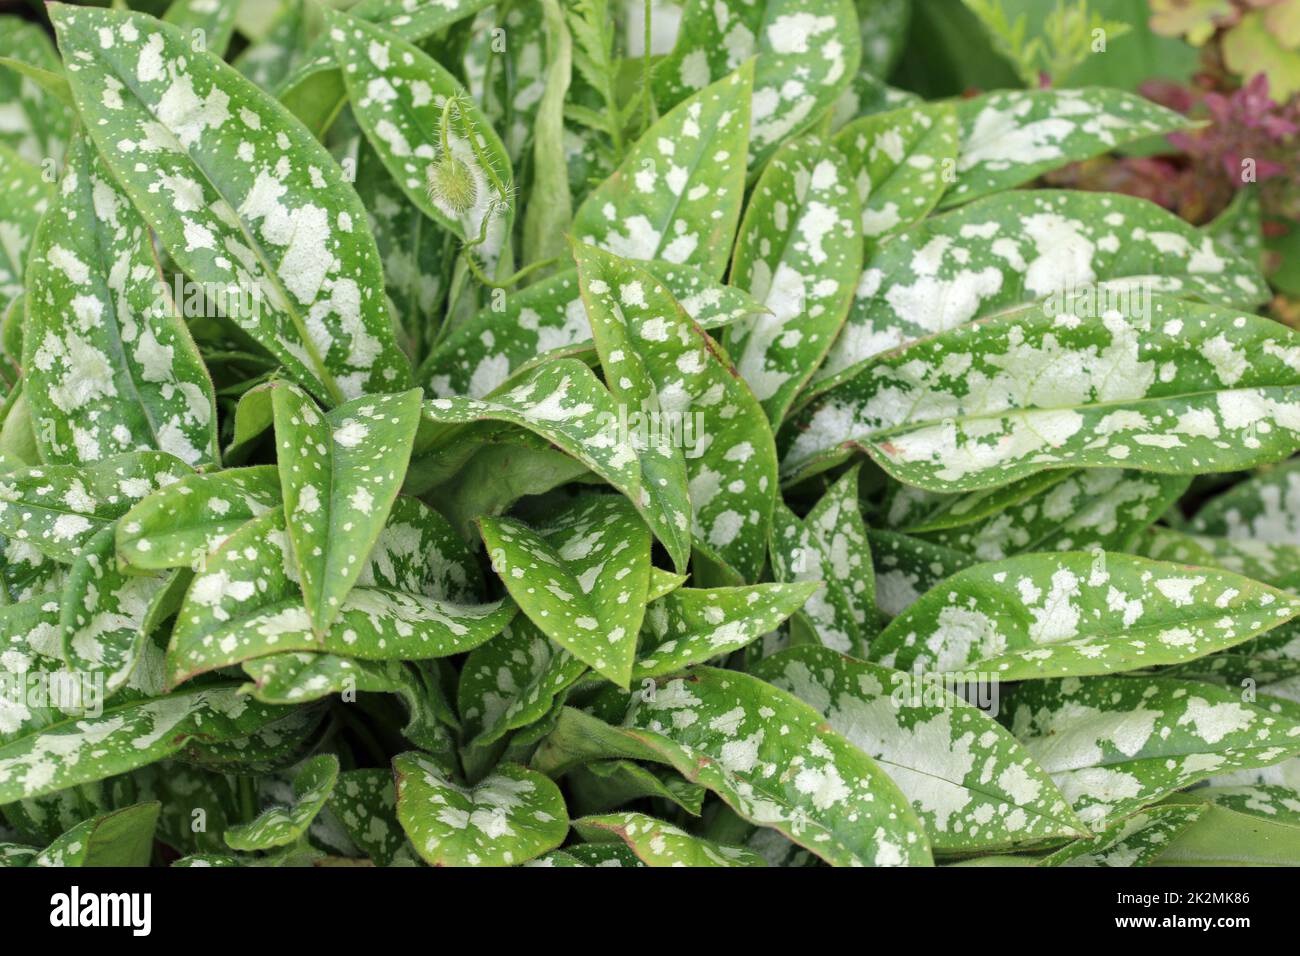 Spotted lungwort leaves in close up Stock Photo